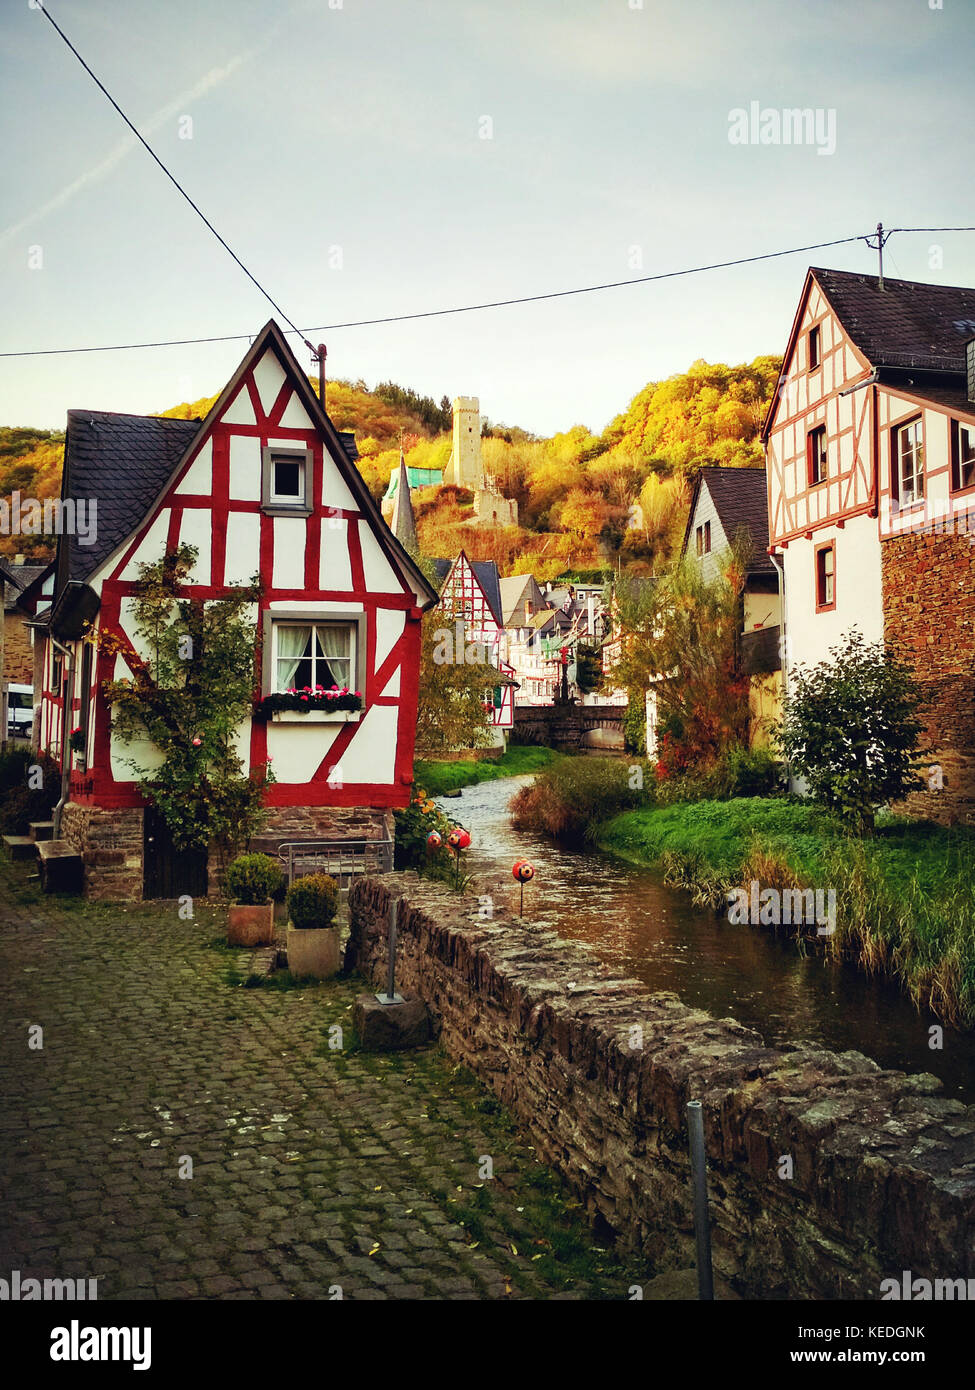 Monreal, one of the most beautiful towns in the Eifel, Germany. Stock Photo